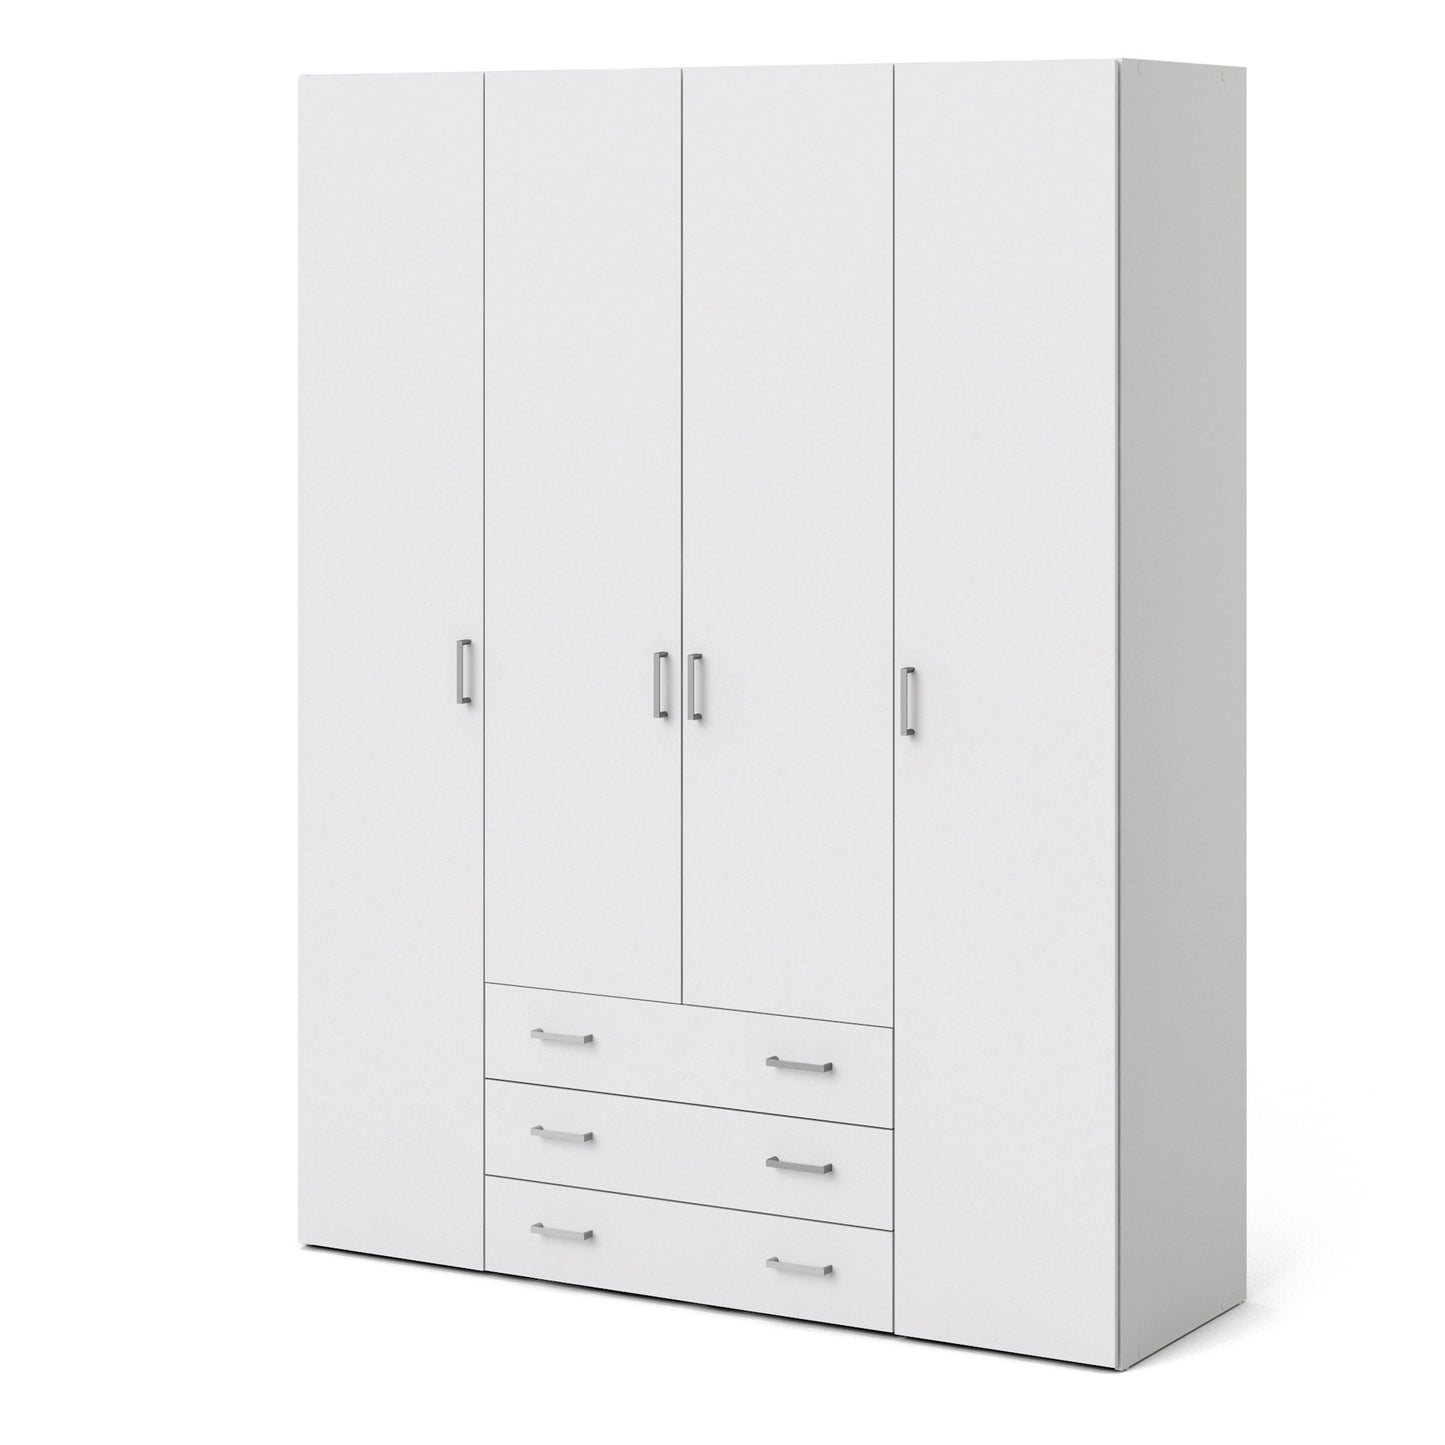 Furniture To Go Space Wardrobe - 4 Doors 3 Drawers in White 2000